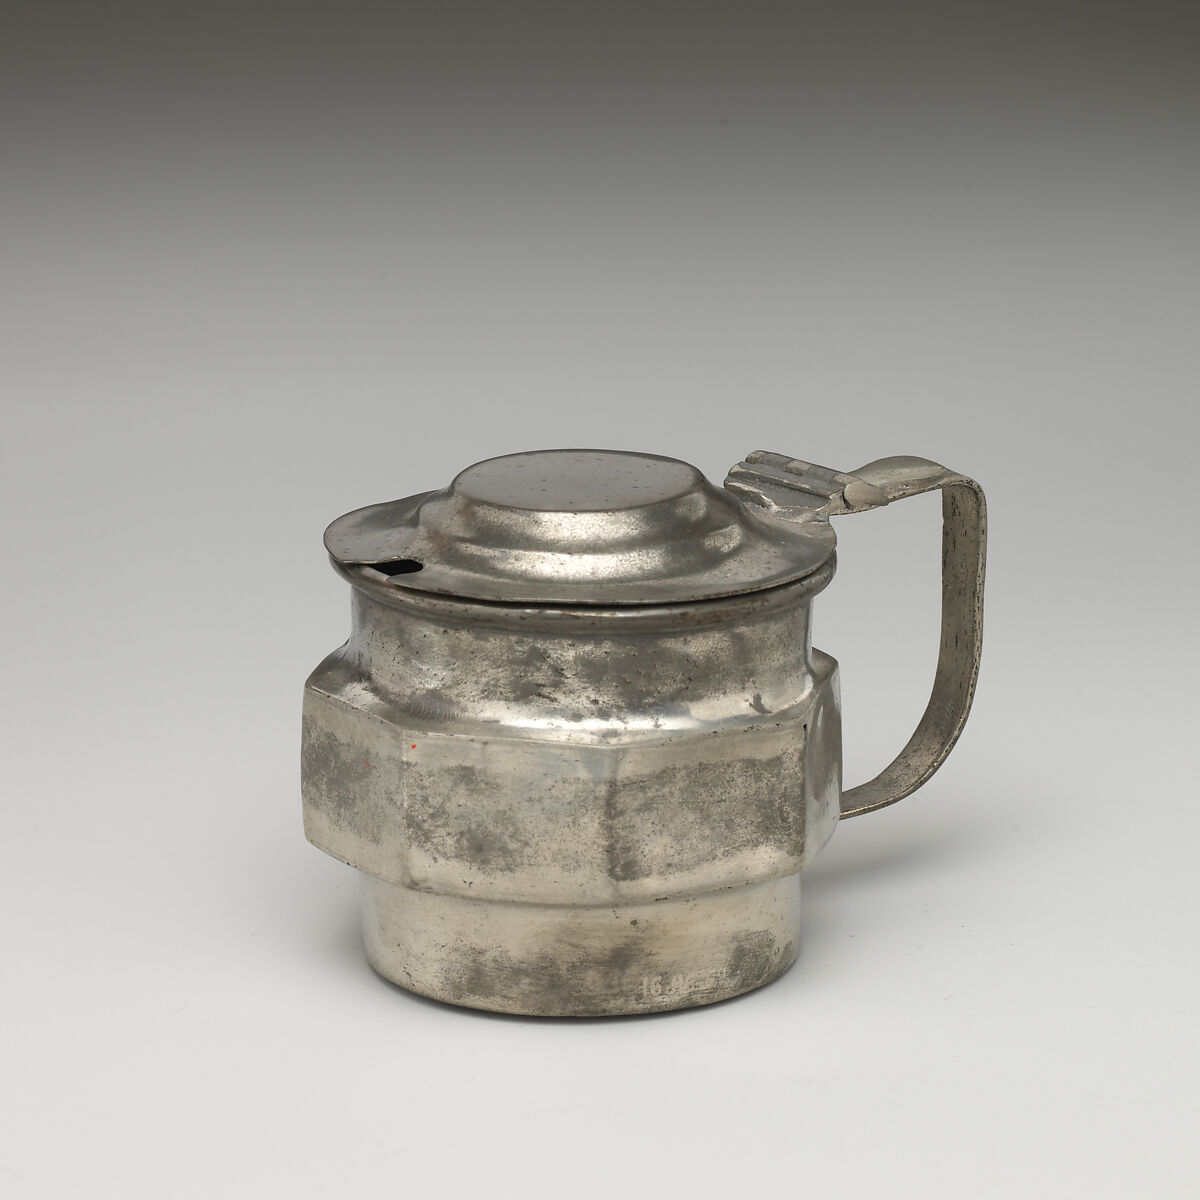 Mustard pot, Pewter, possibly British or Dutch 